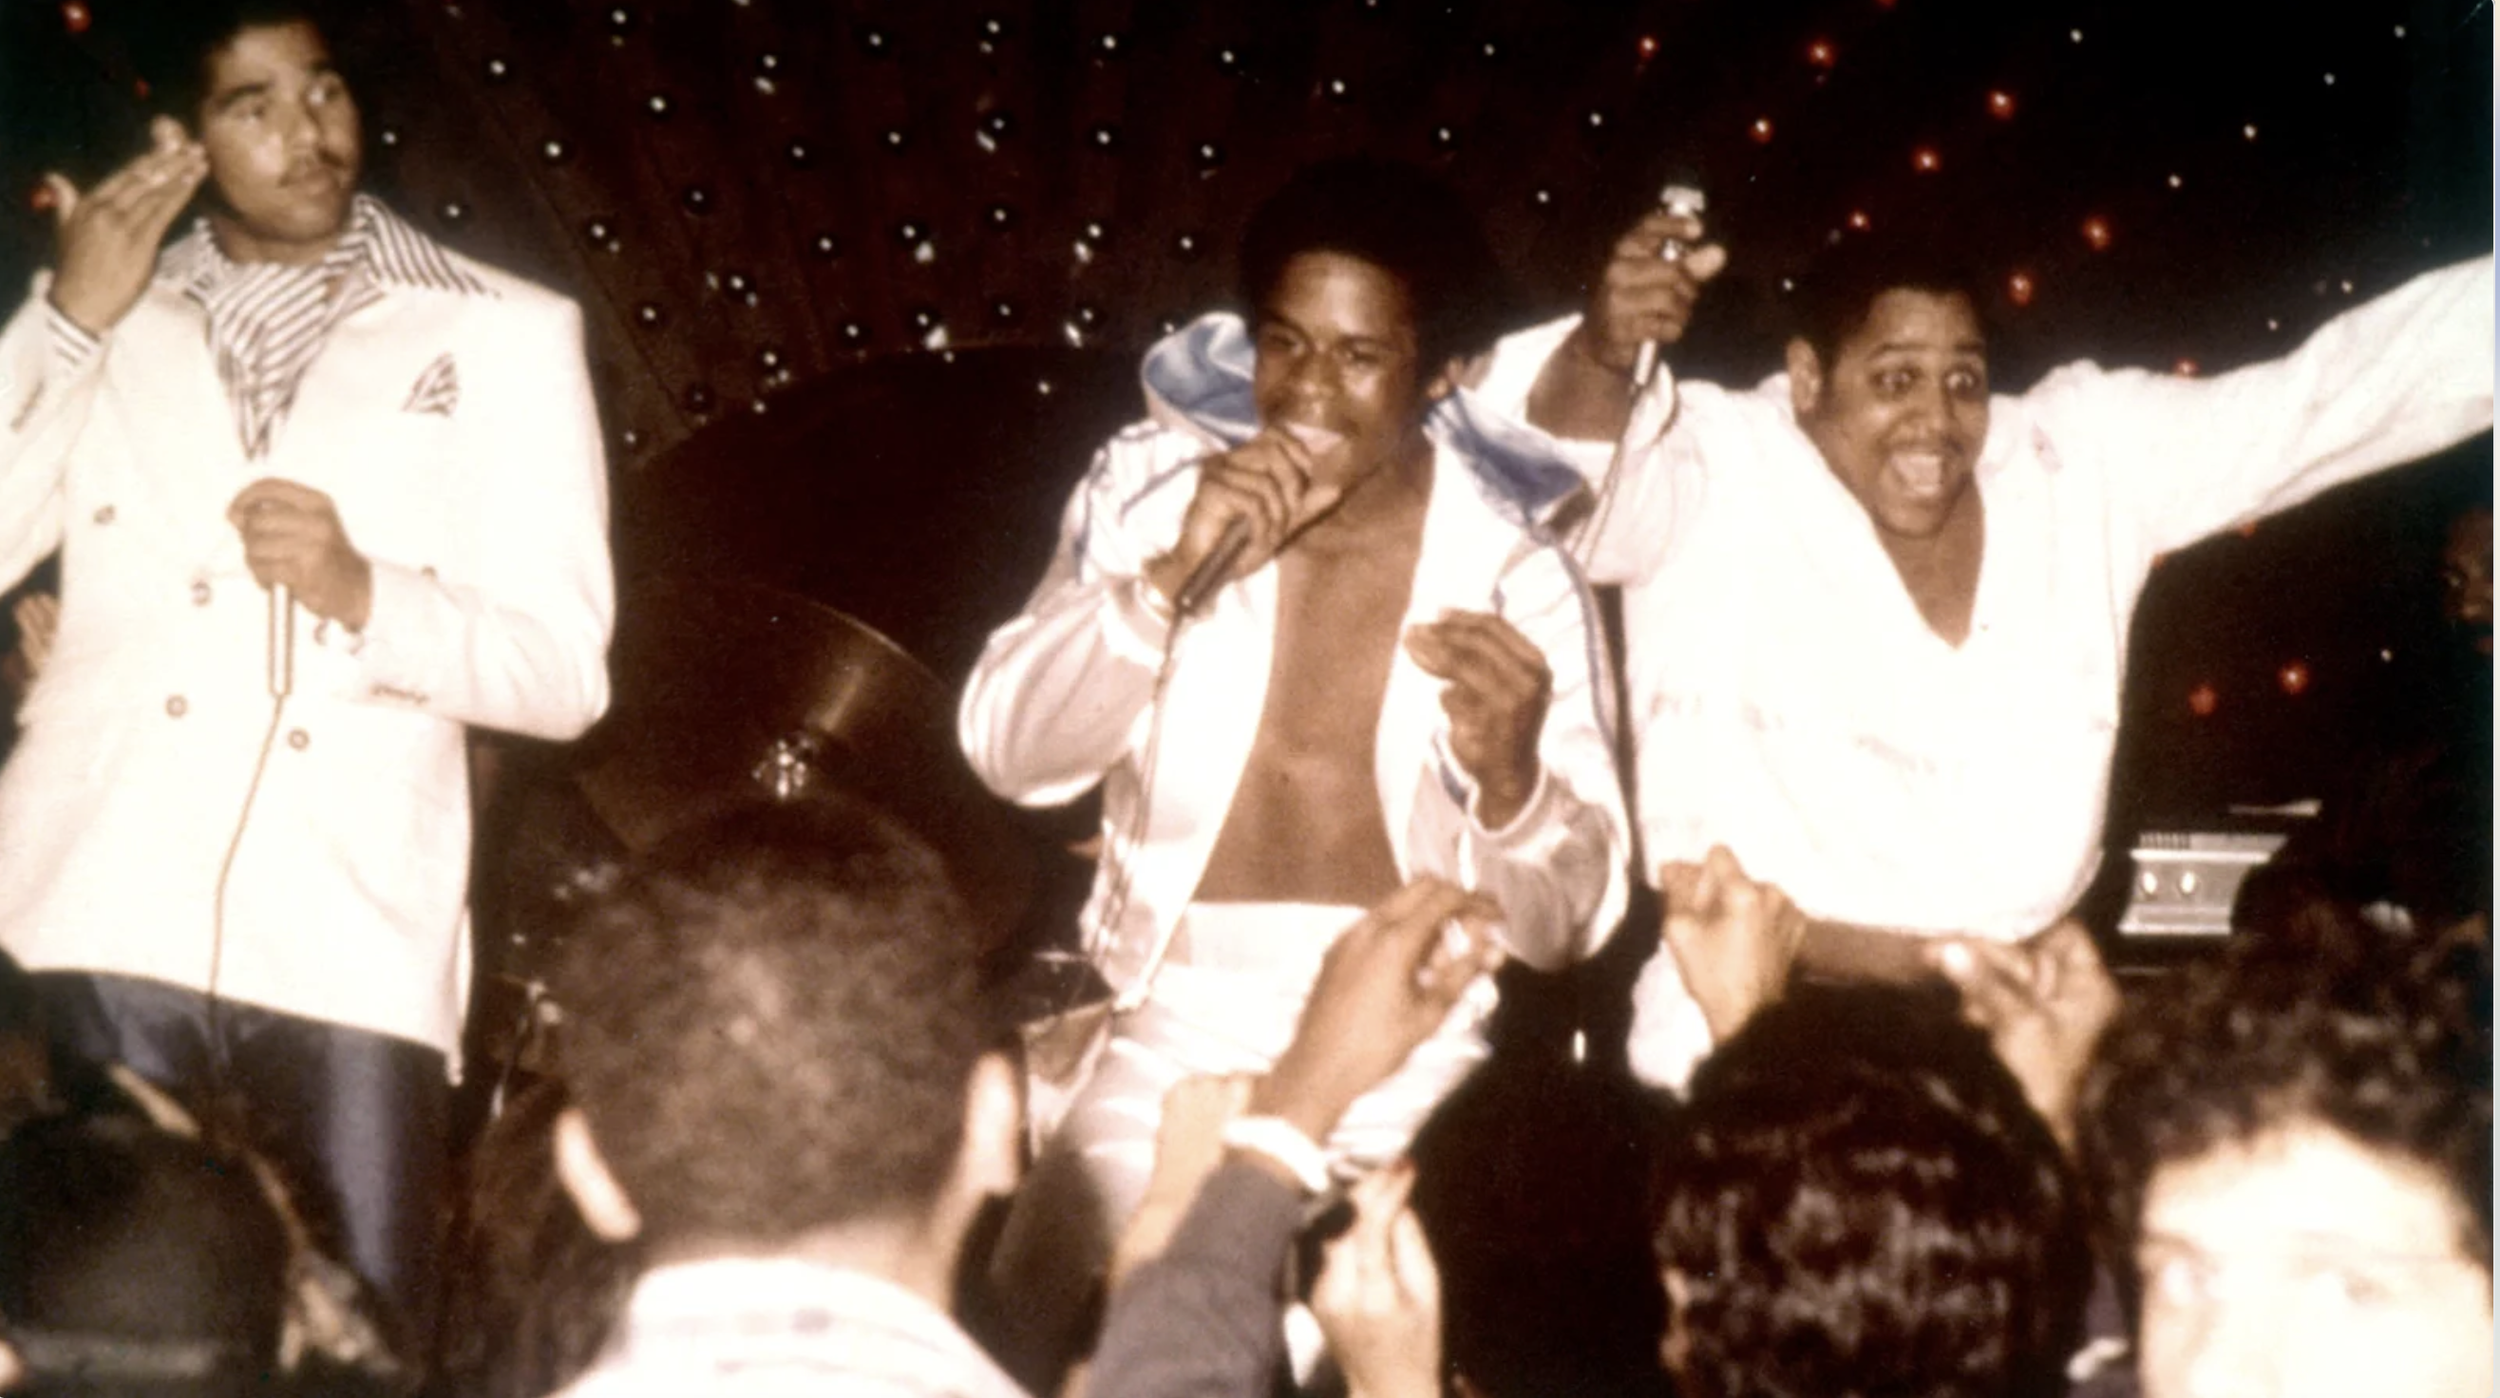 Rap pioneers the Sugarhill Gang (left to right: Wonder Mike, Master G and Big Bank Hank) perform live circa 1979.